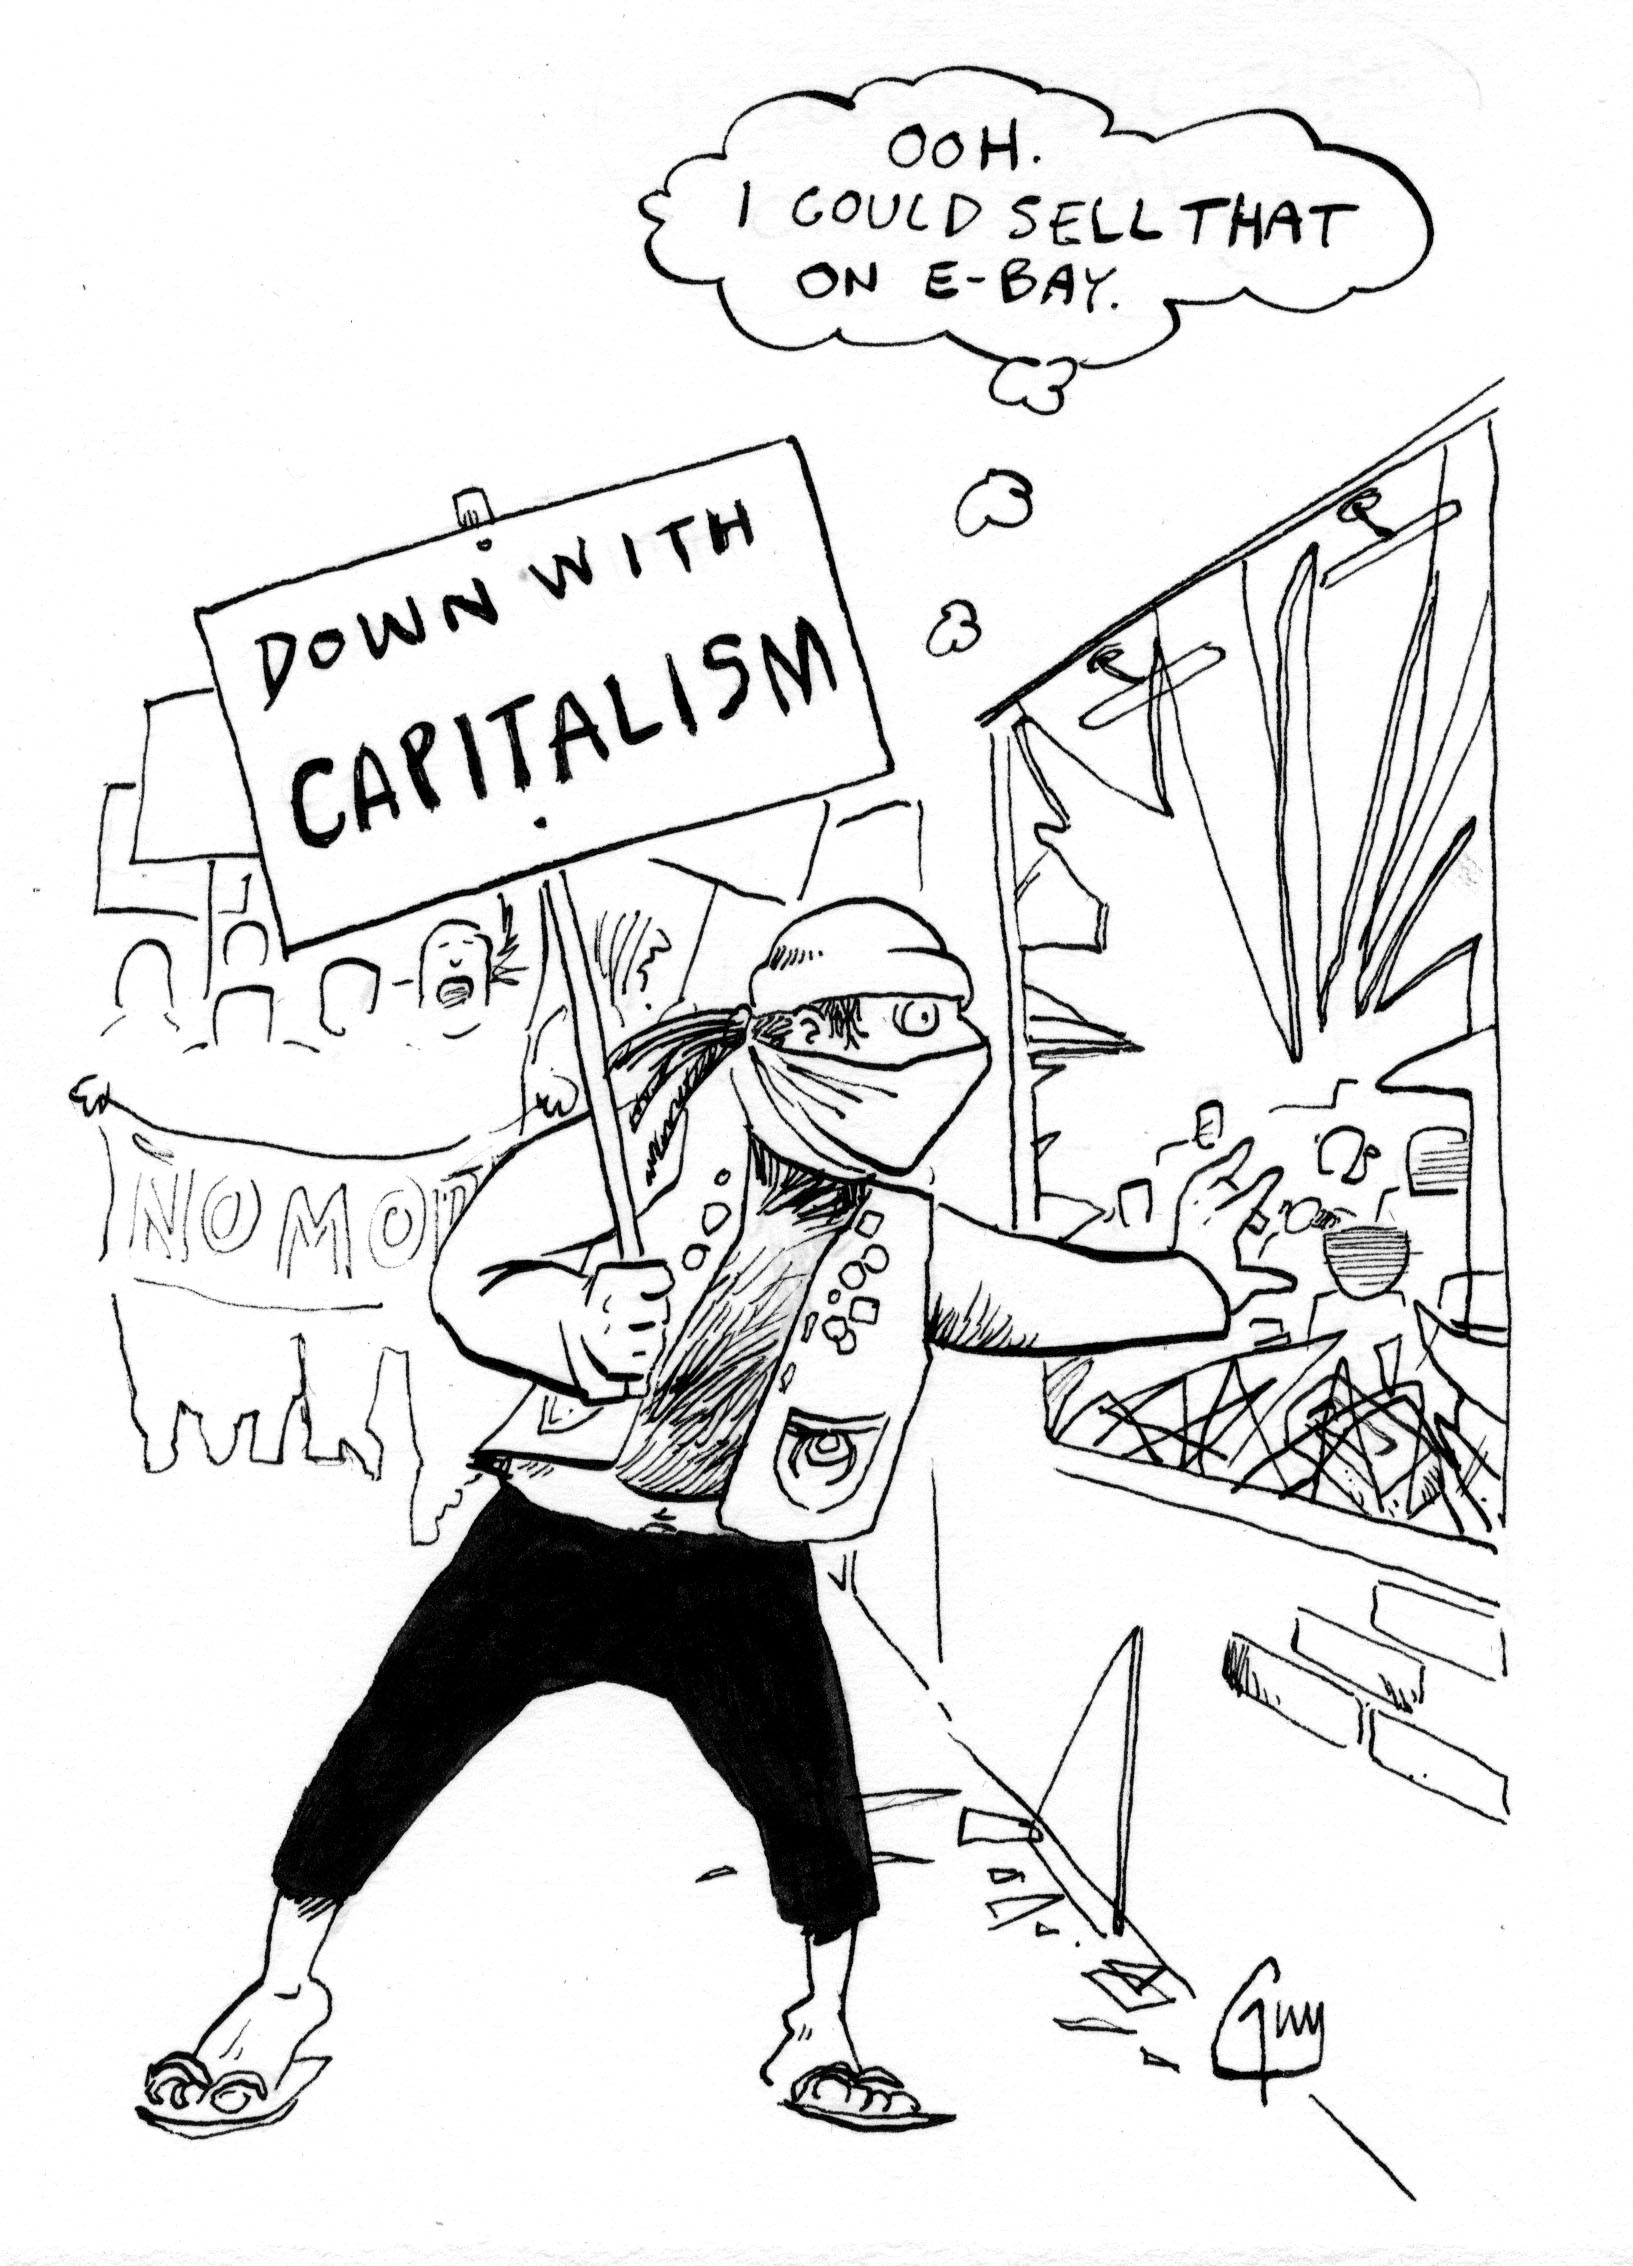 Down WIth Capitalism!